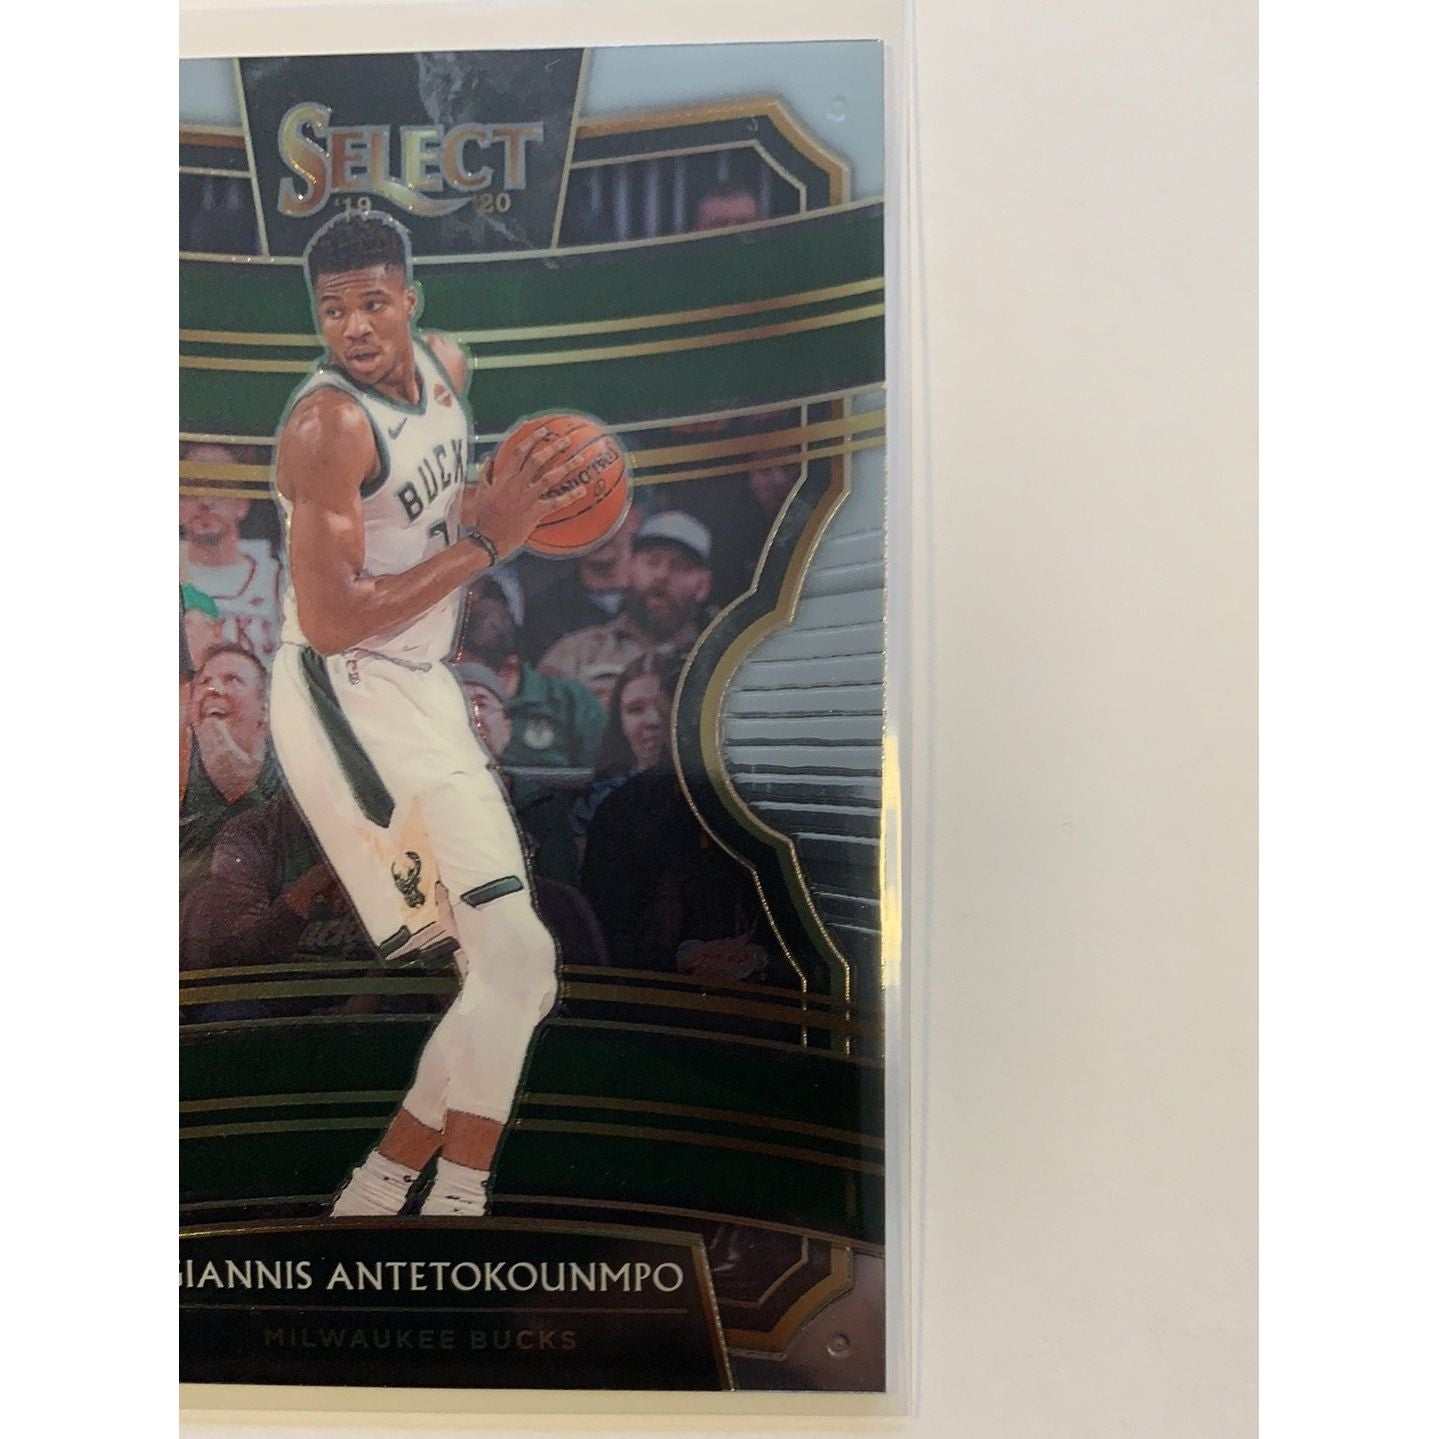  2019-20 Panini Select Giannis Antetokounmpo Base #22  Local Legends Cards & Collectibles